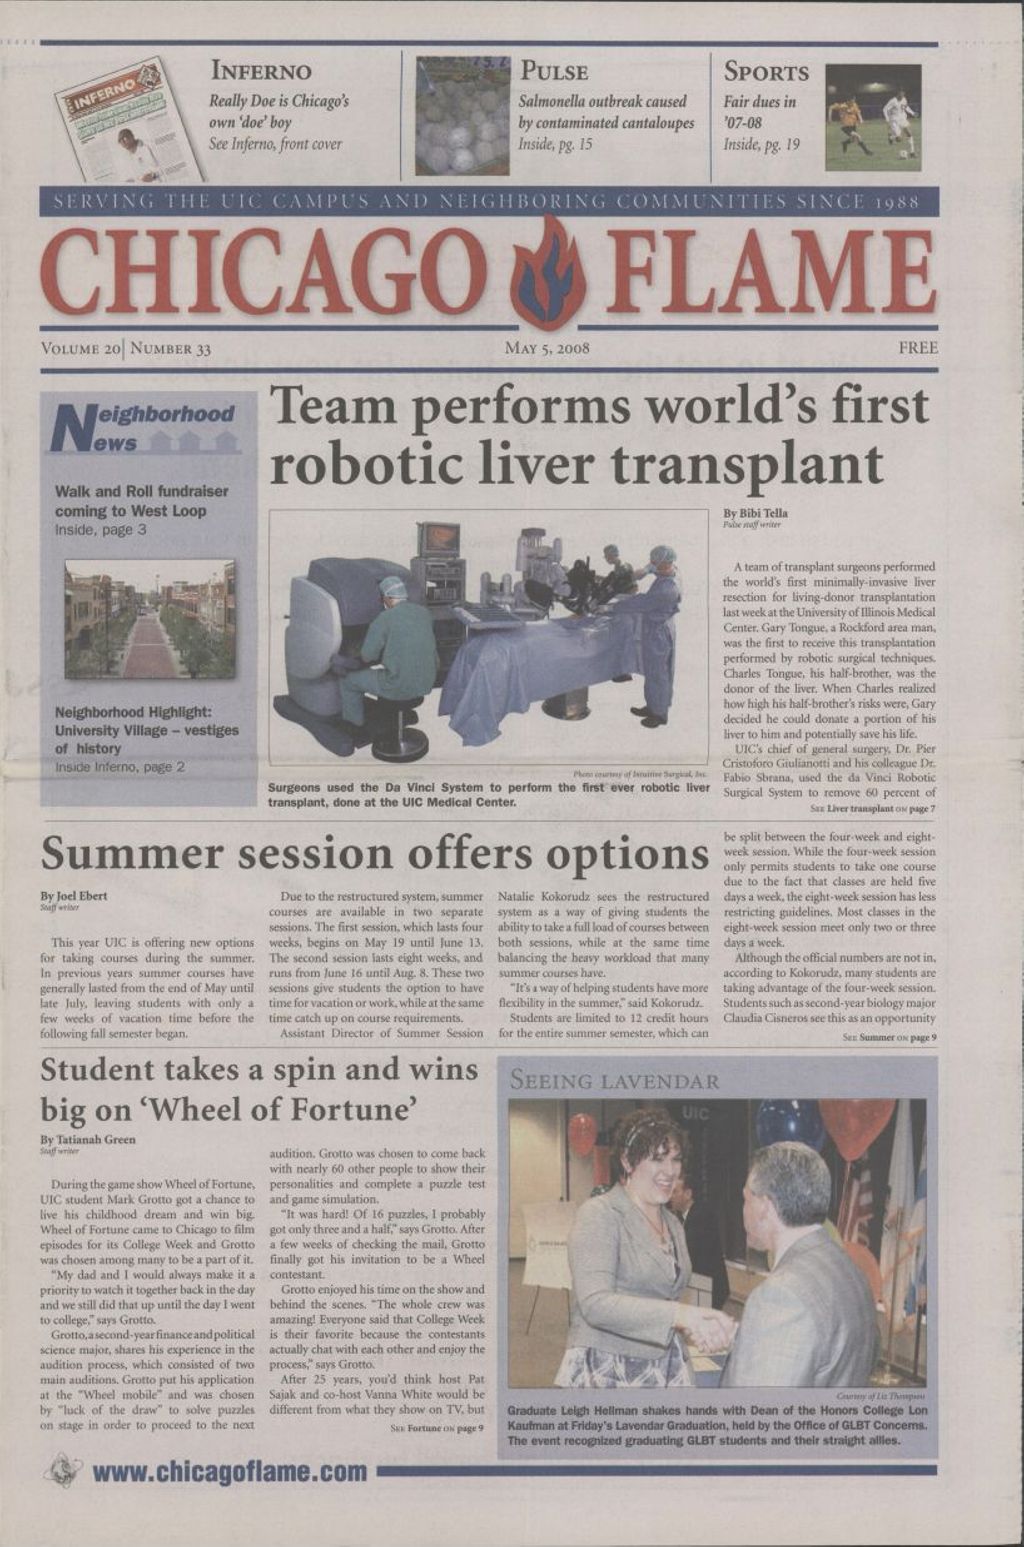 Chicago Flame (May 5, 2008)